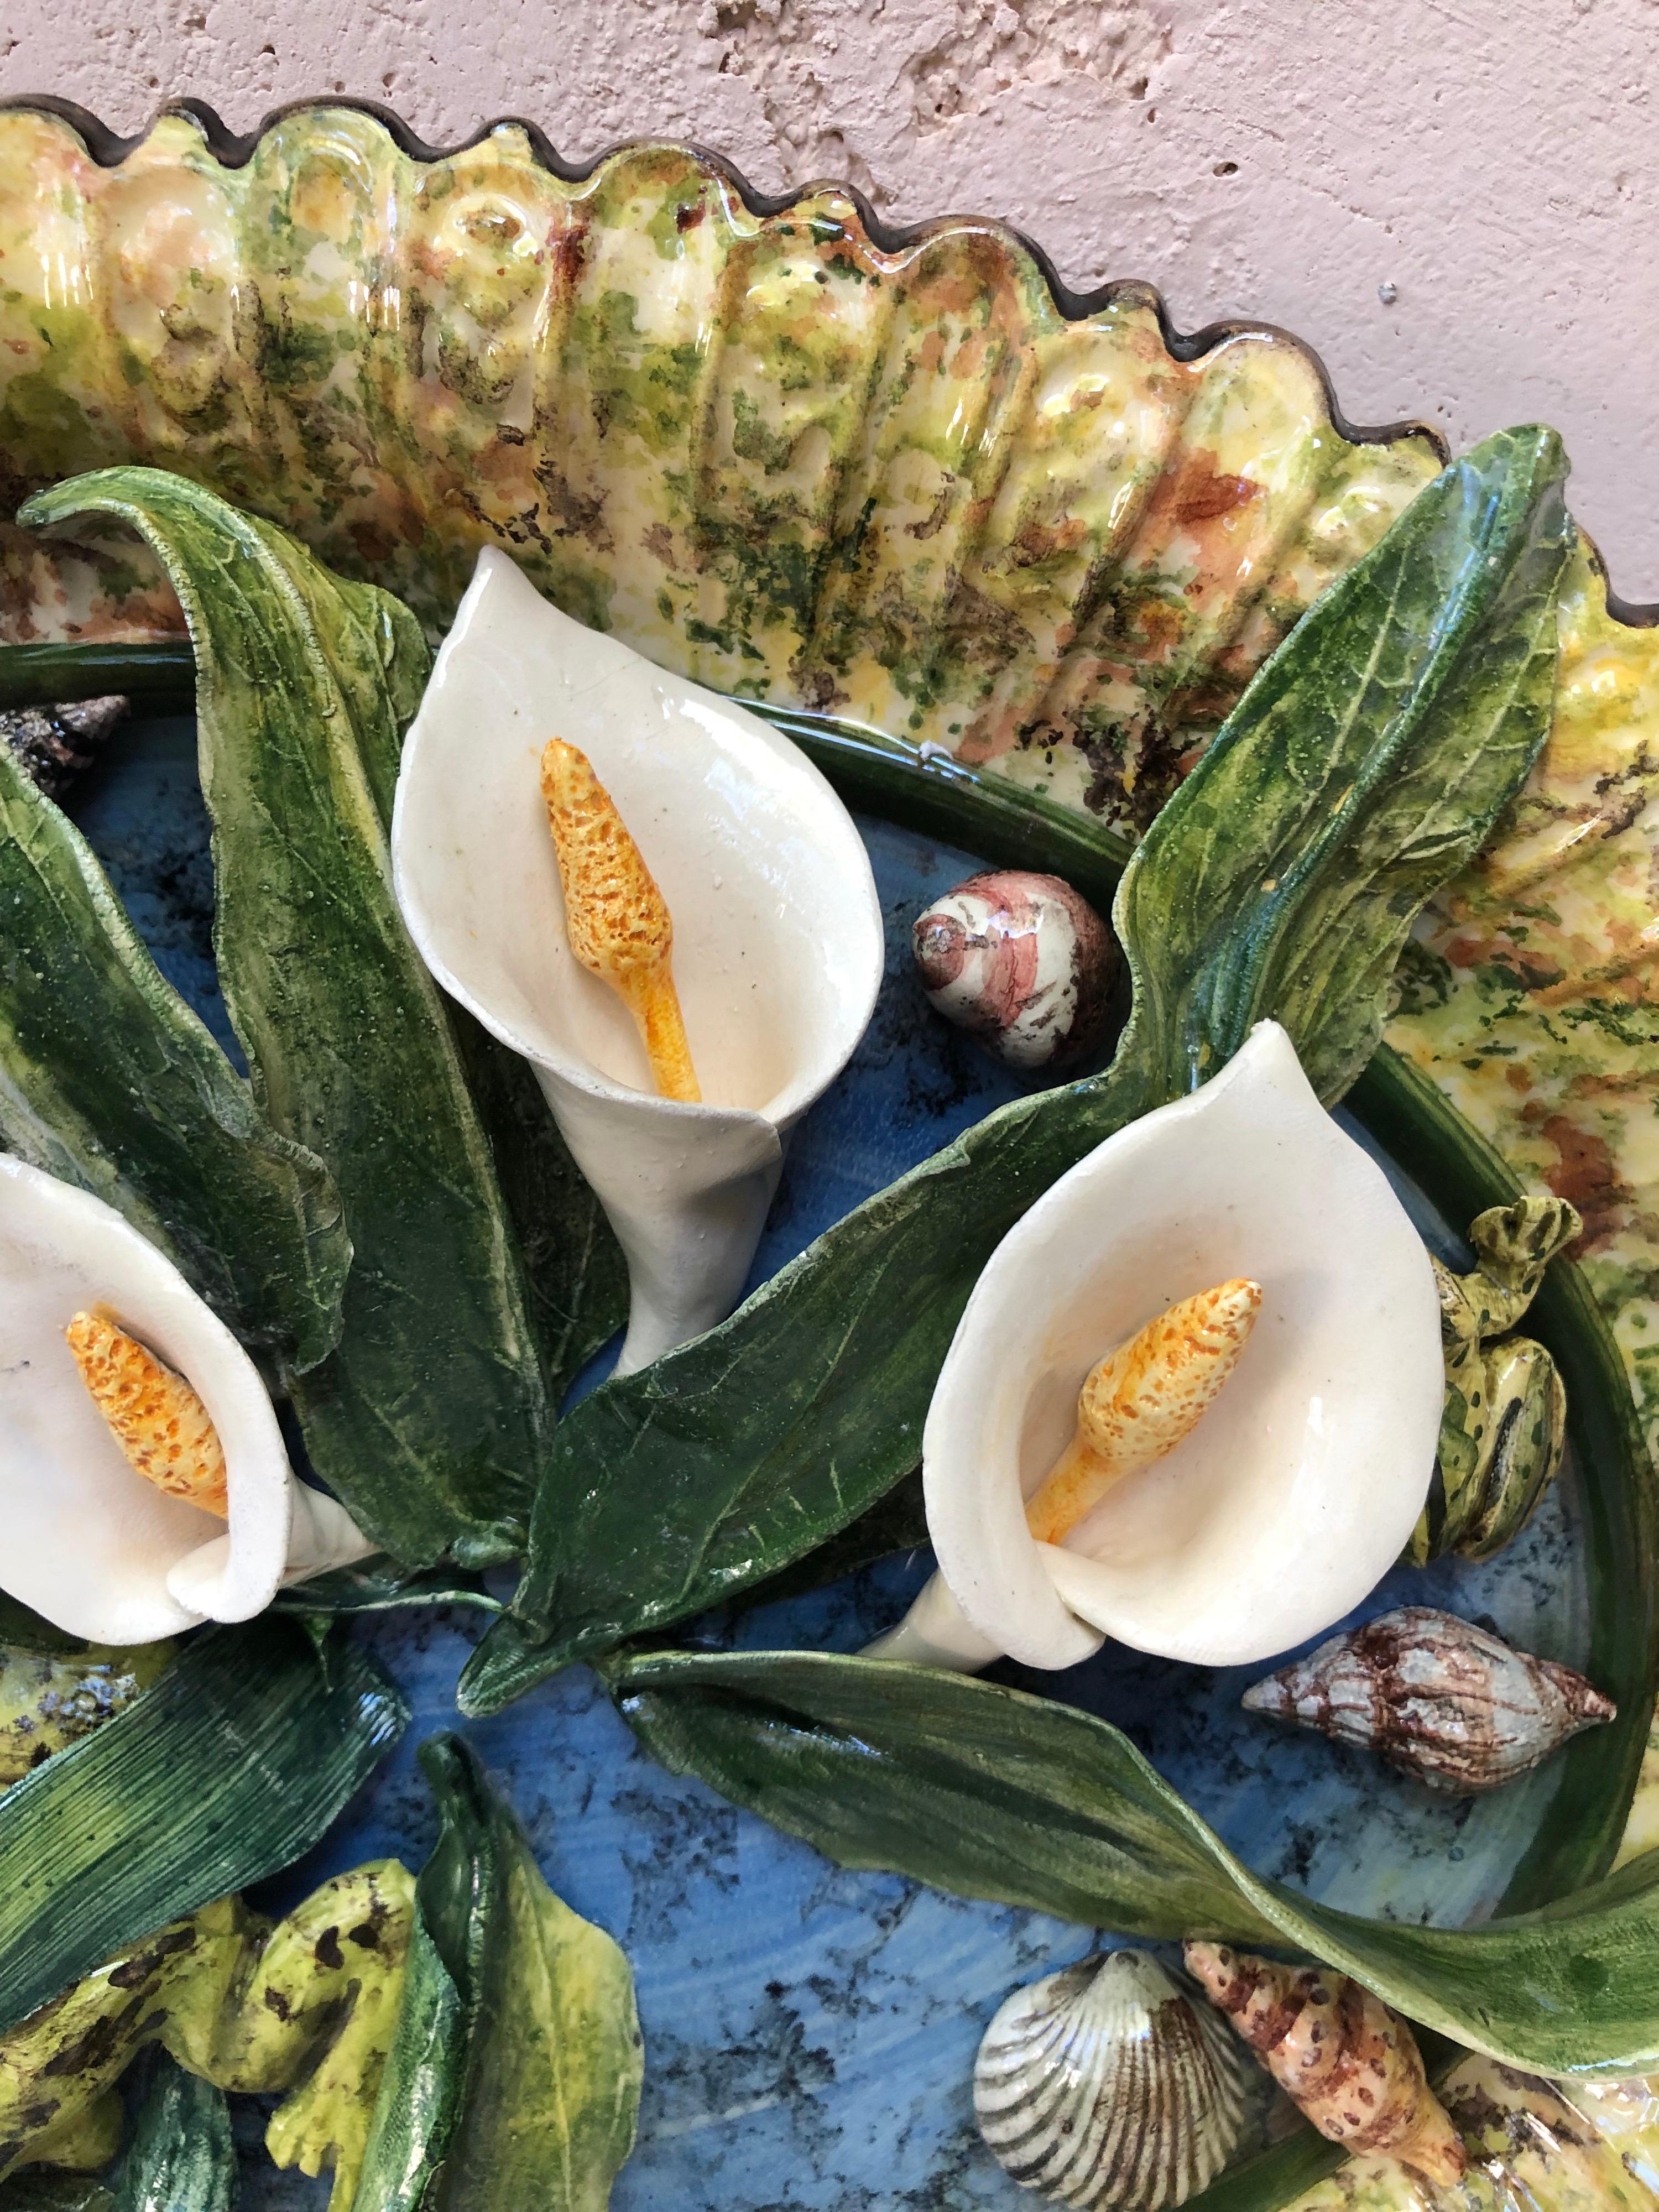 Rare Majolica platter arums, frogs, shells signed Christine Viennet circa 2000.
Christine Viennet studied at the Oslo school of art, then apprenticed for two Norwegian artists, Rolf Hansen and Bente von Krogh. Between 1965 and 1971, she worked with